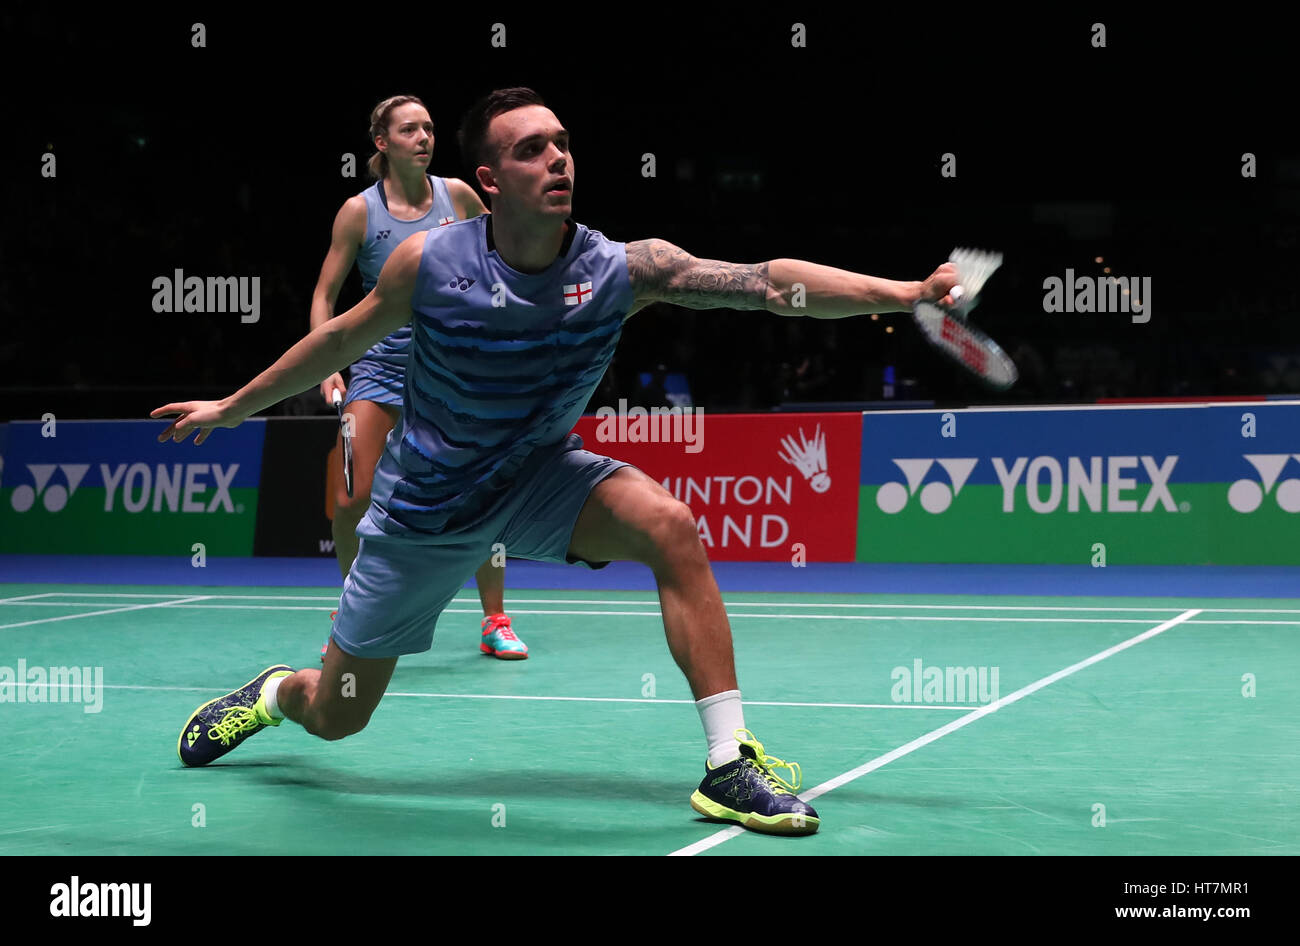 England's Chris Adcock (front) and Gabrielle Adcock in action during the Mixed doubles match during day two of the YONEX All England Open Badminton Championships at the Barclaycard Arena, Birmingham. Stock Photo